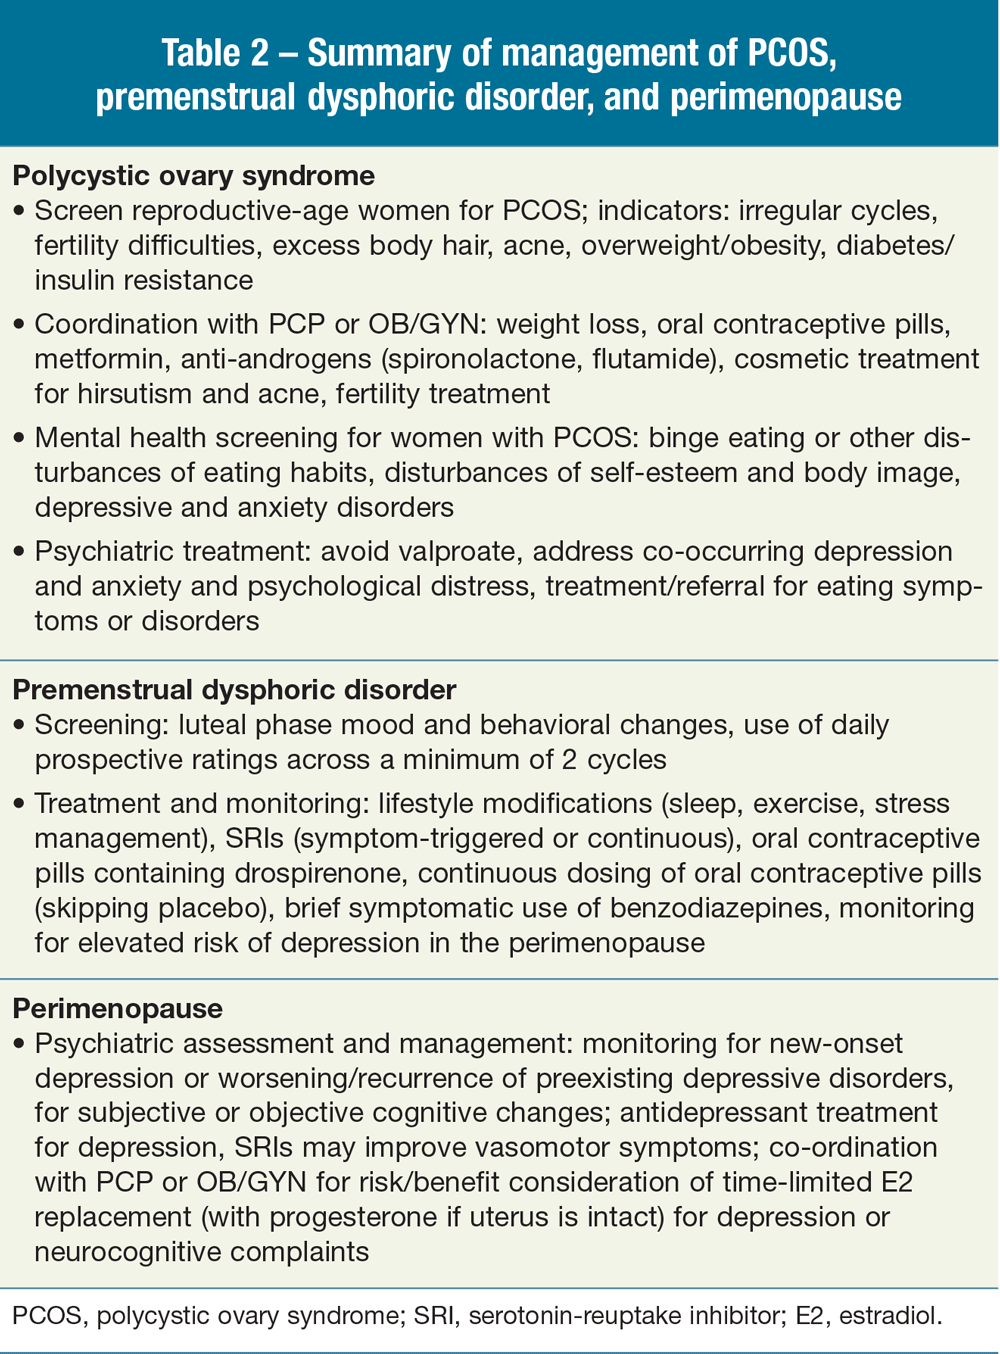 Summary - Management of PCOS, premenstrual dysphoric disorder, and perimenopause